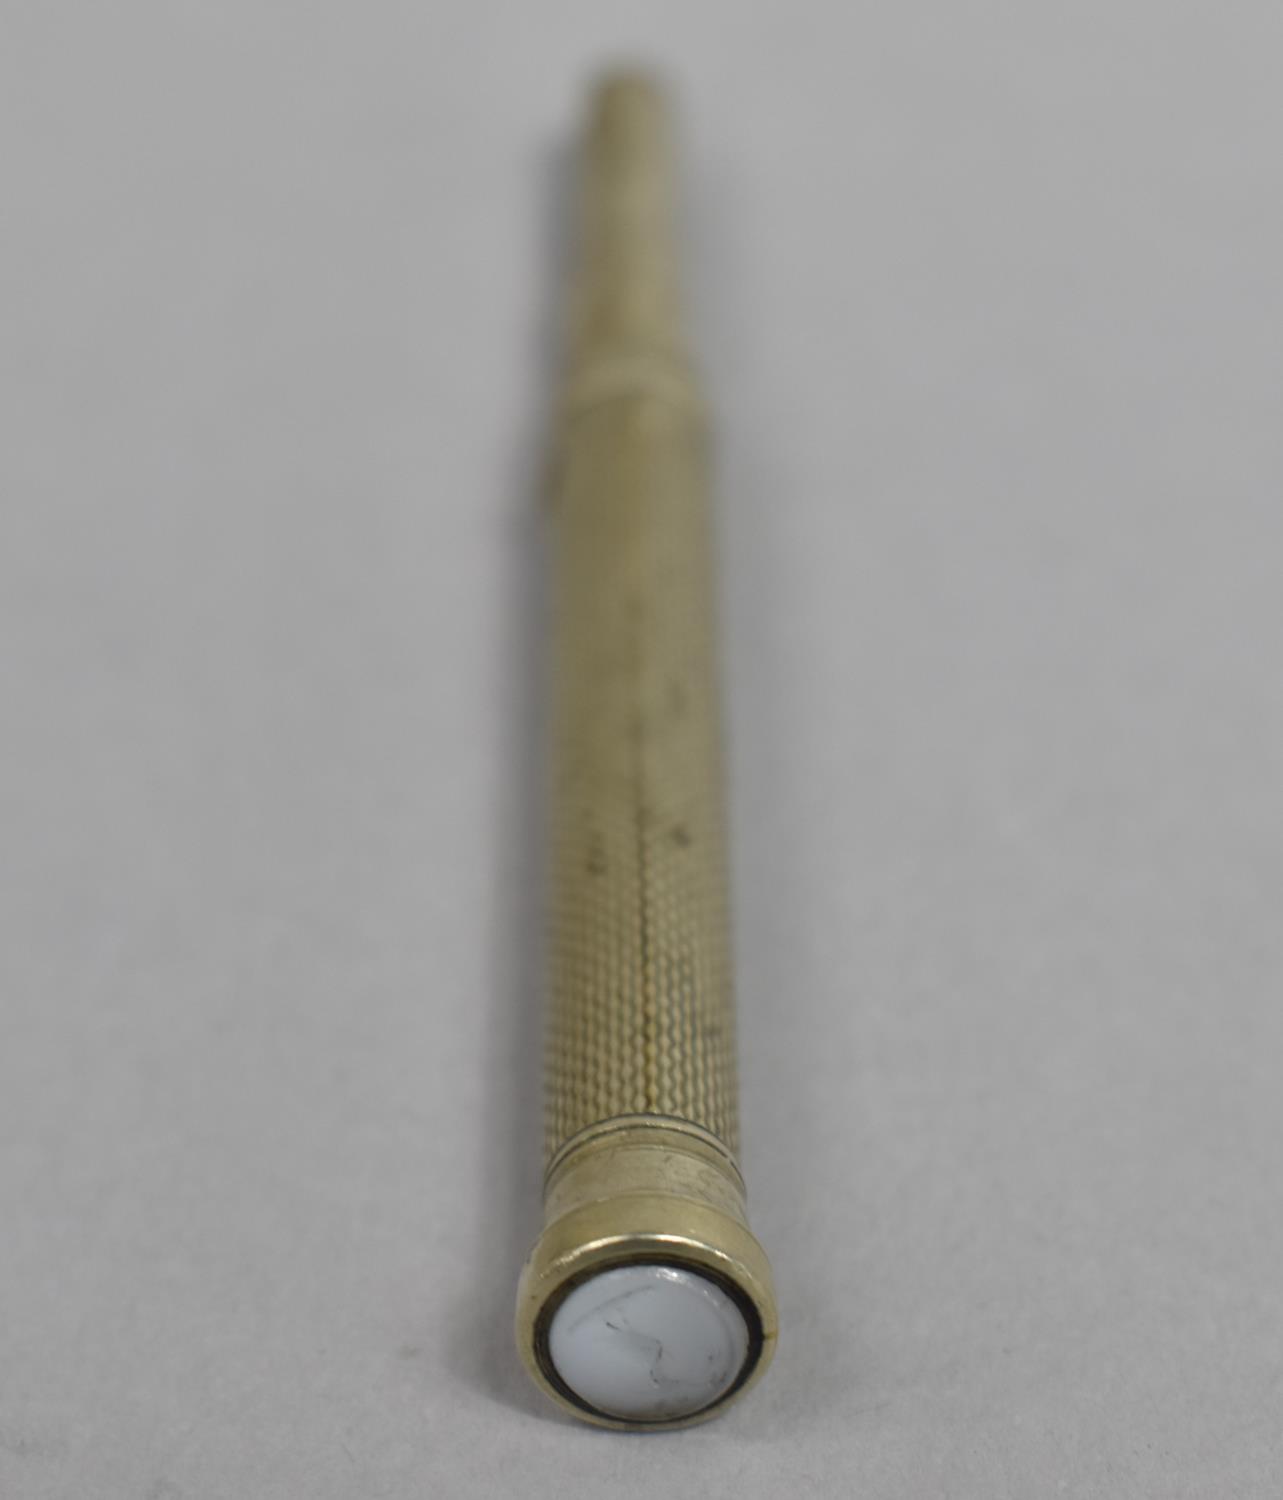 A Late Victorian/Edwardian Dual Pencil and Pen with Small Intaglio End, 8cms long - Image 3 of 3